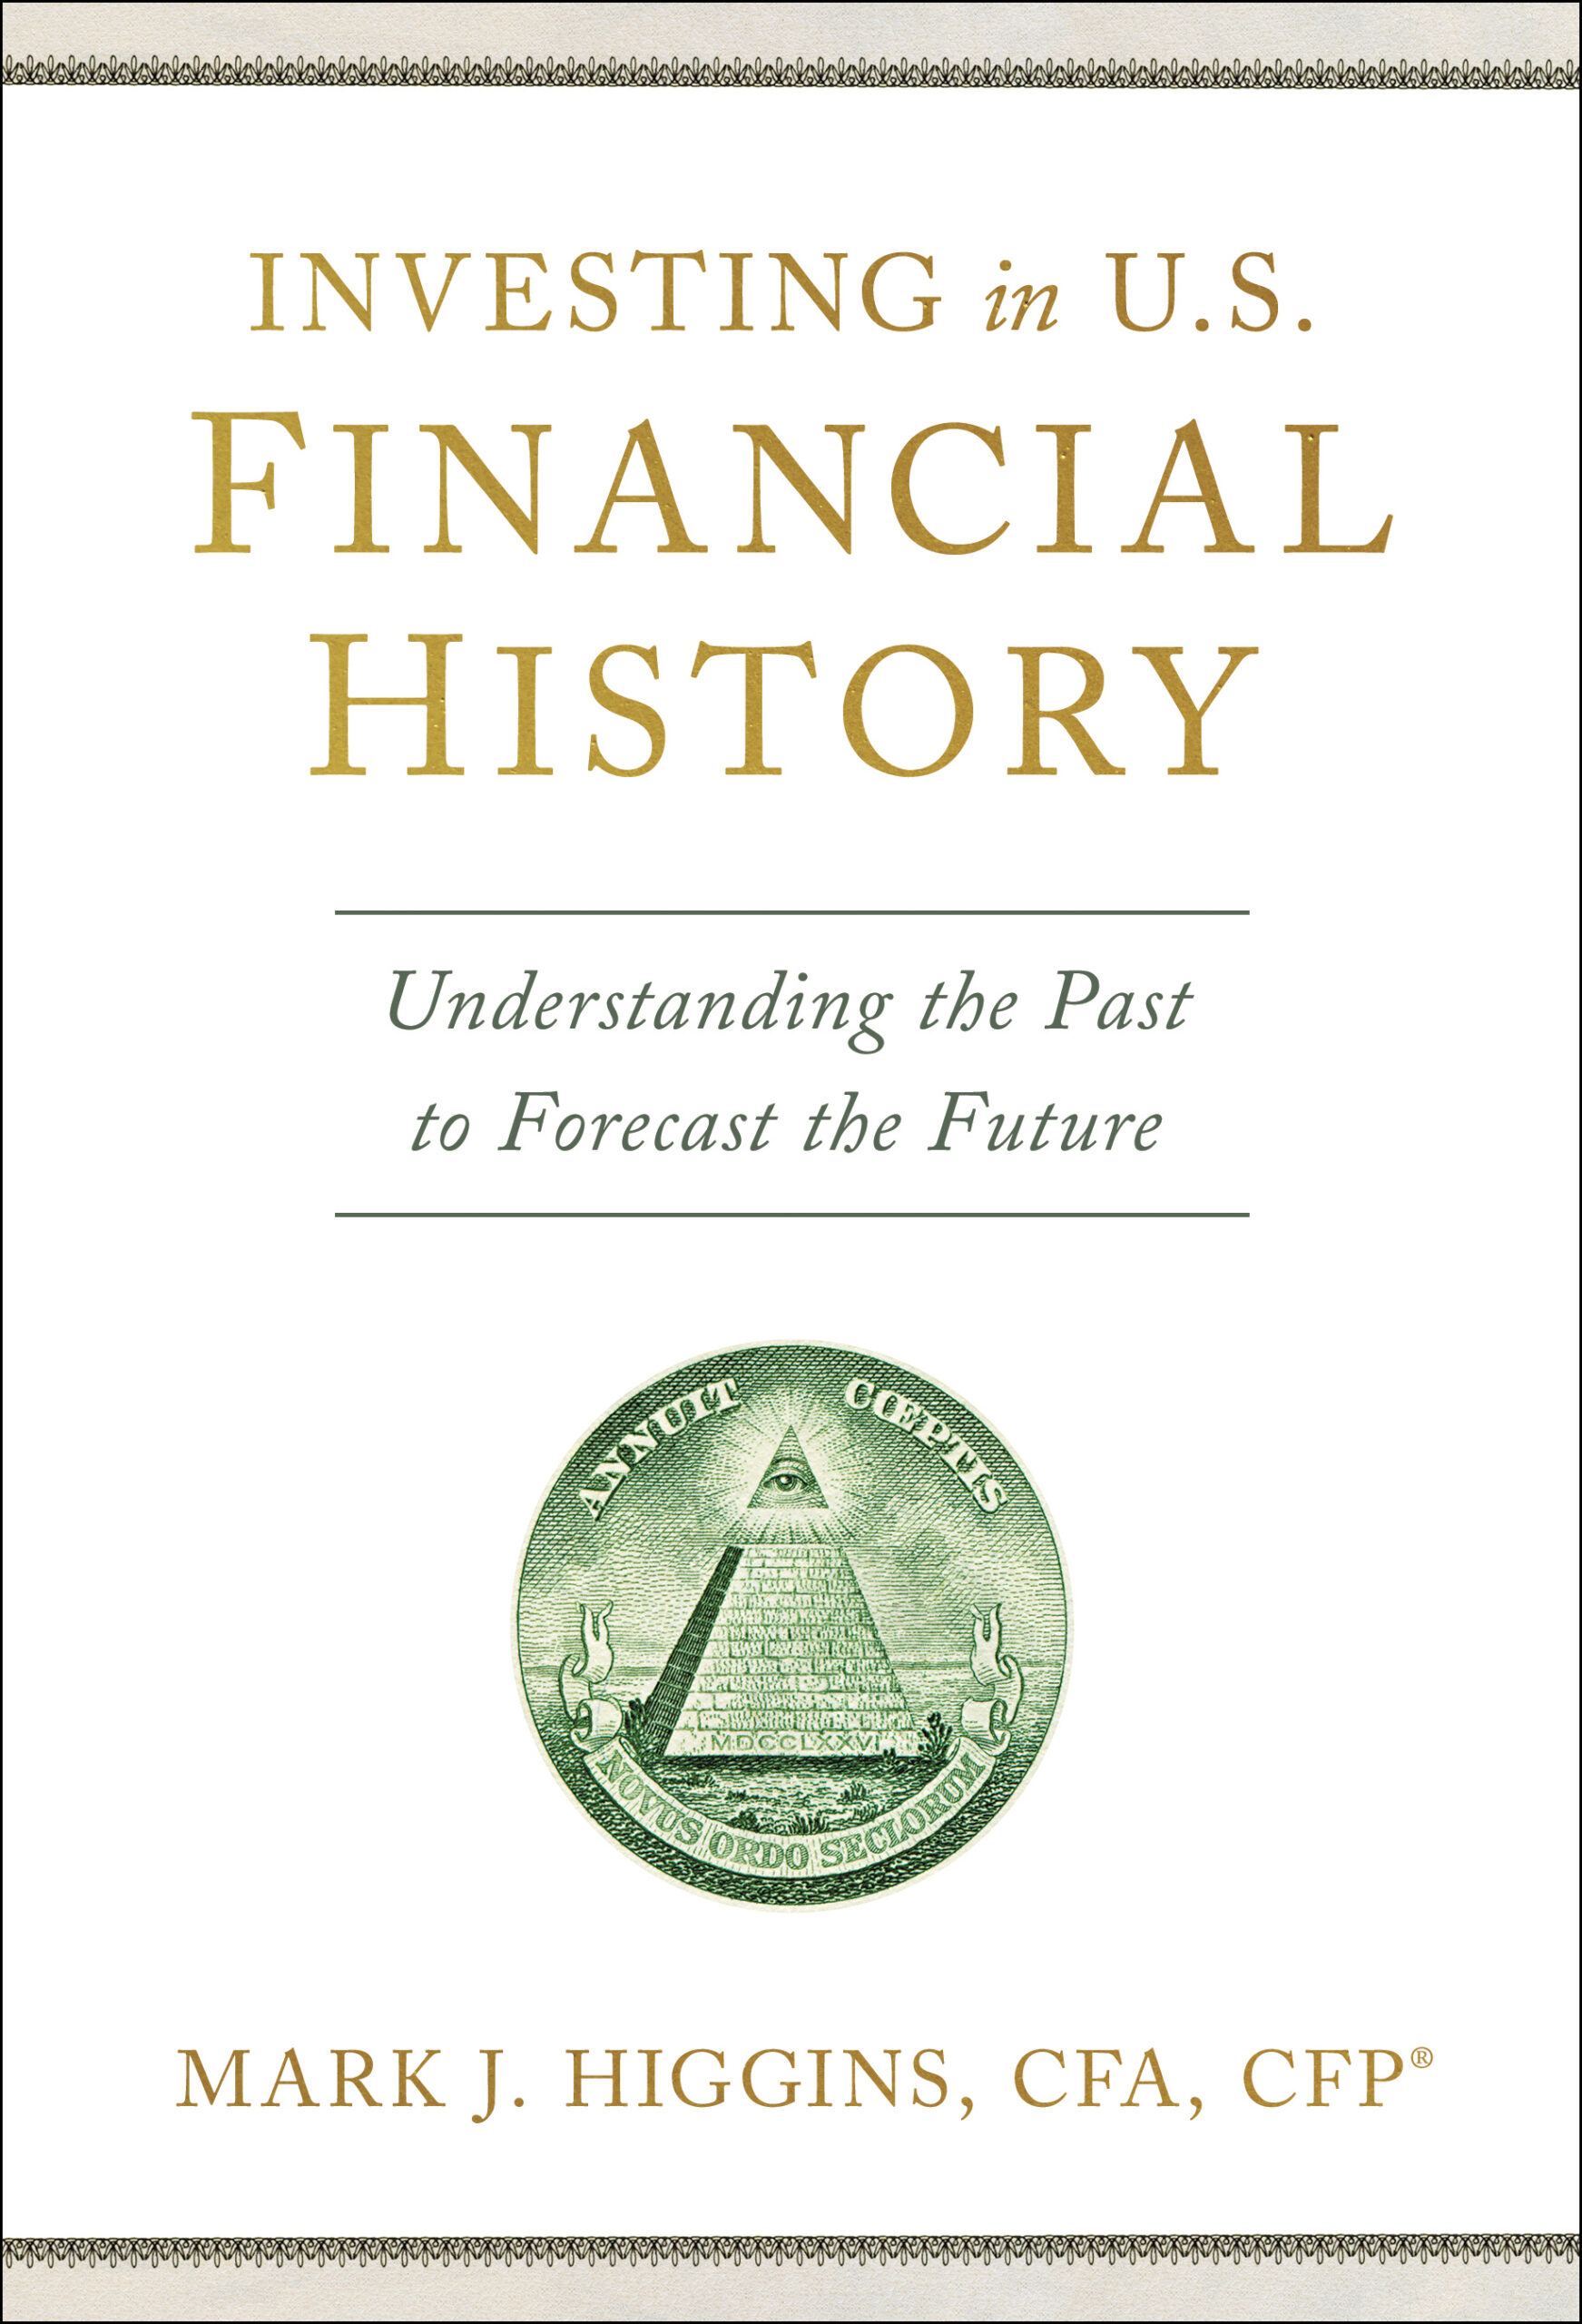 Investing in U.S. Financial History - Book Cover